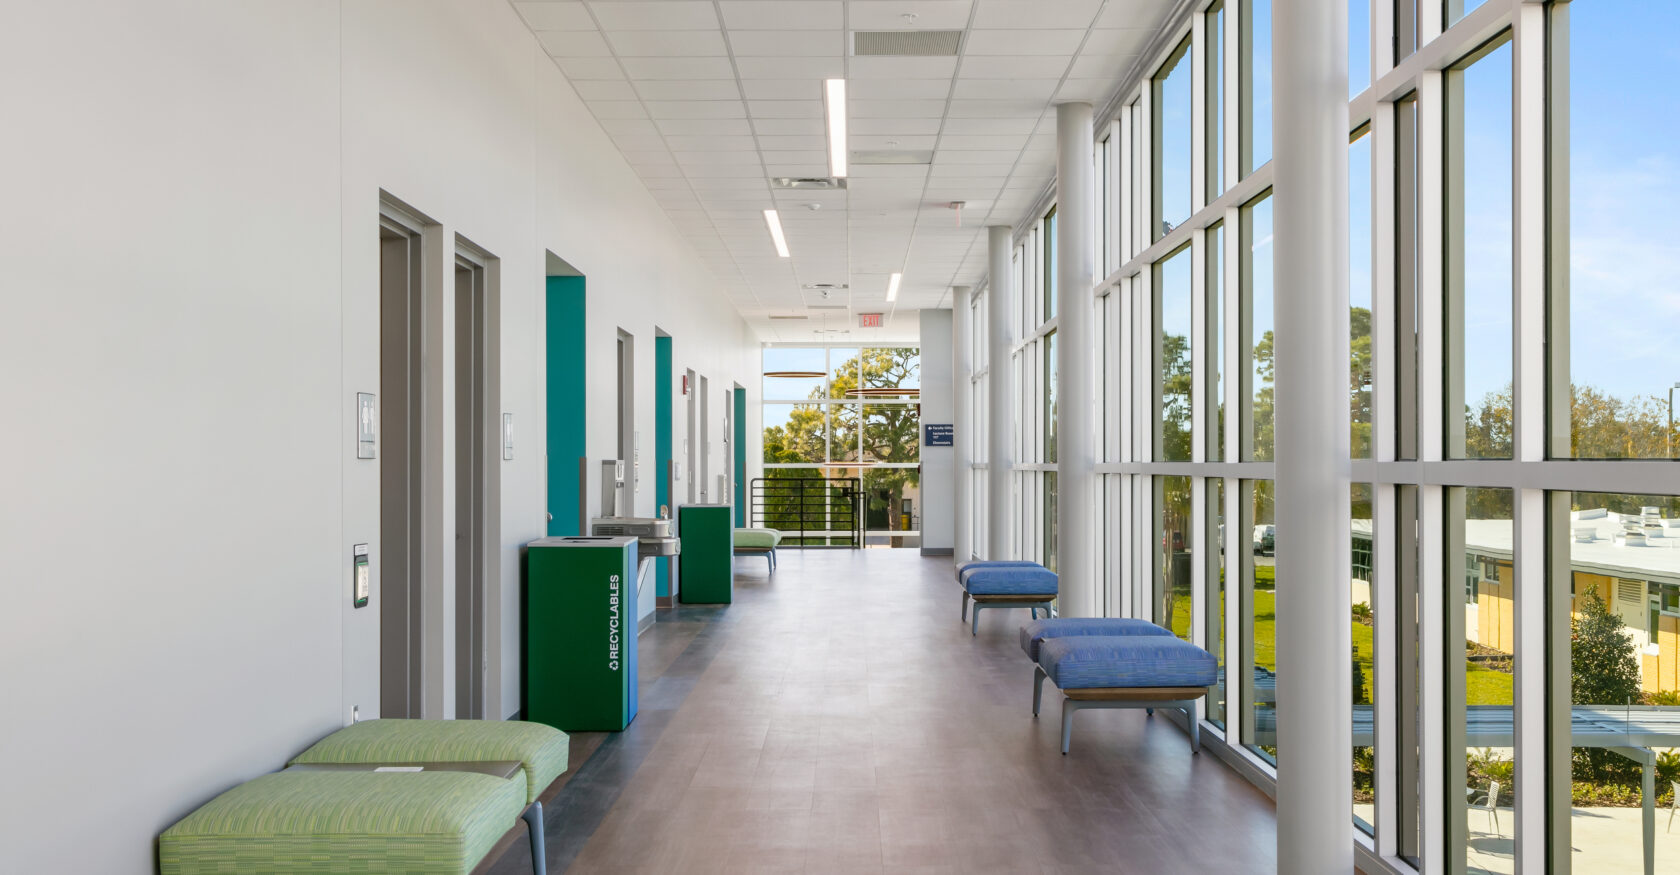 SCF Science building hallway with large floor to ceiling windows letting in a lot of light with blue and green seating for students